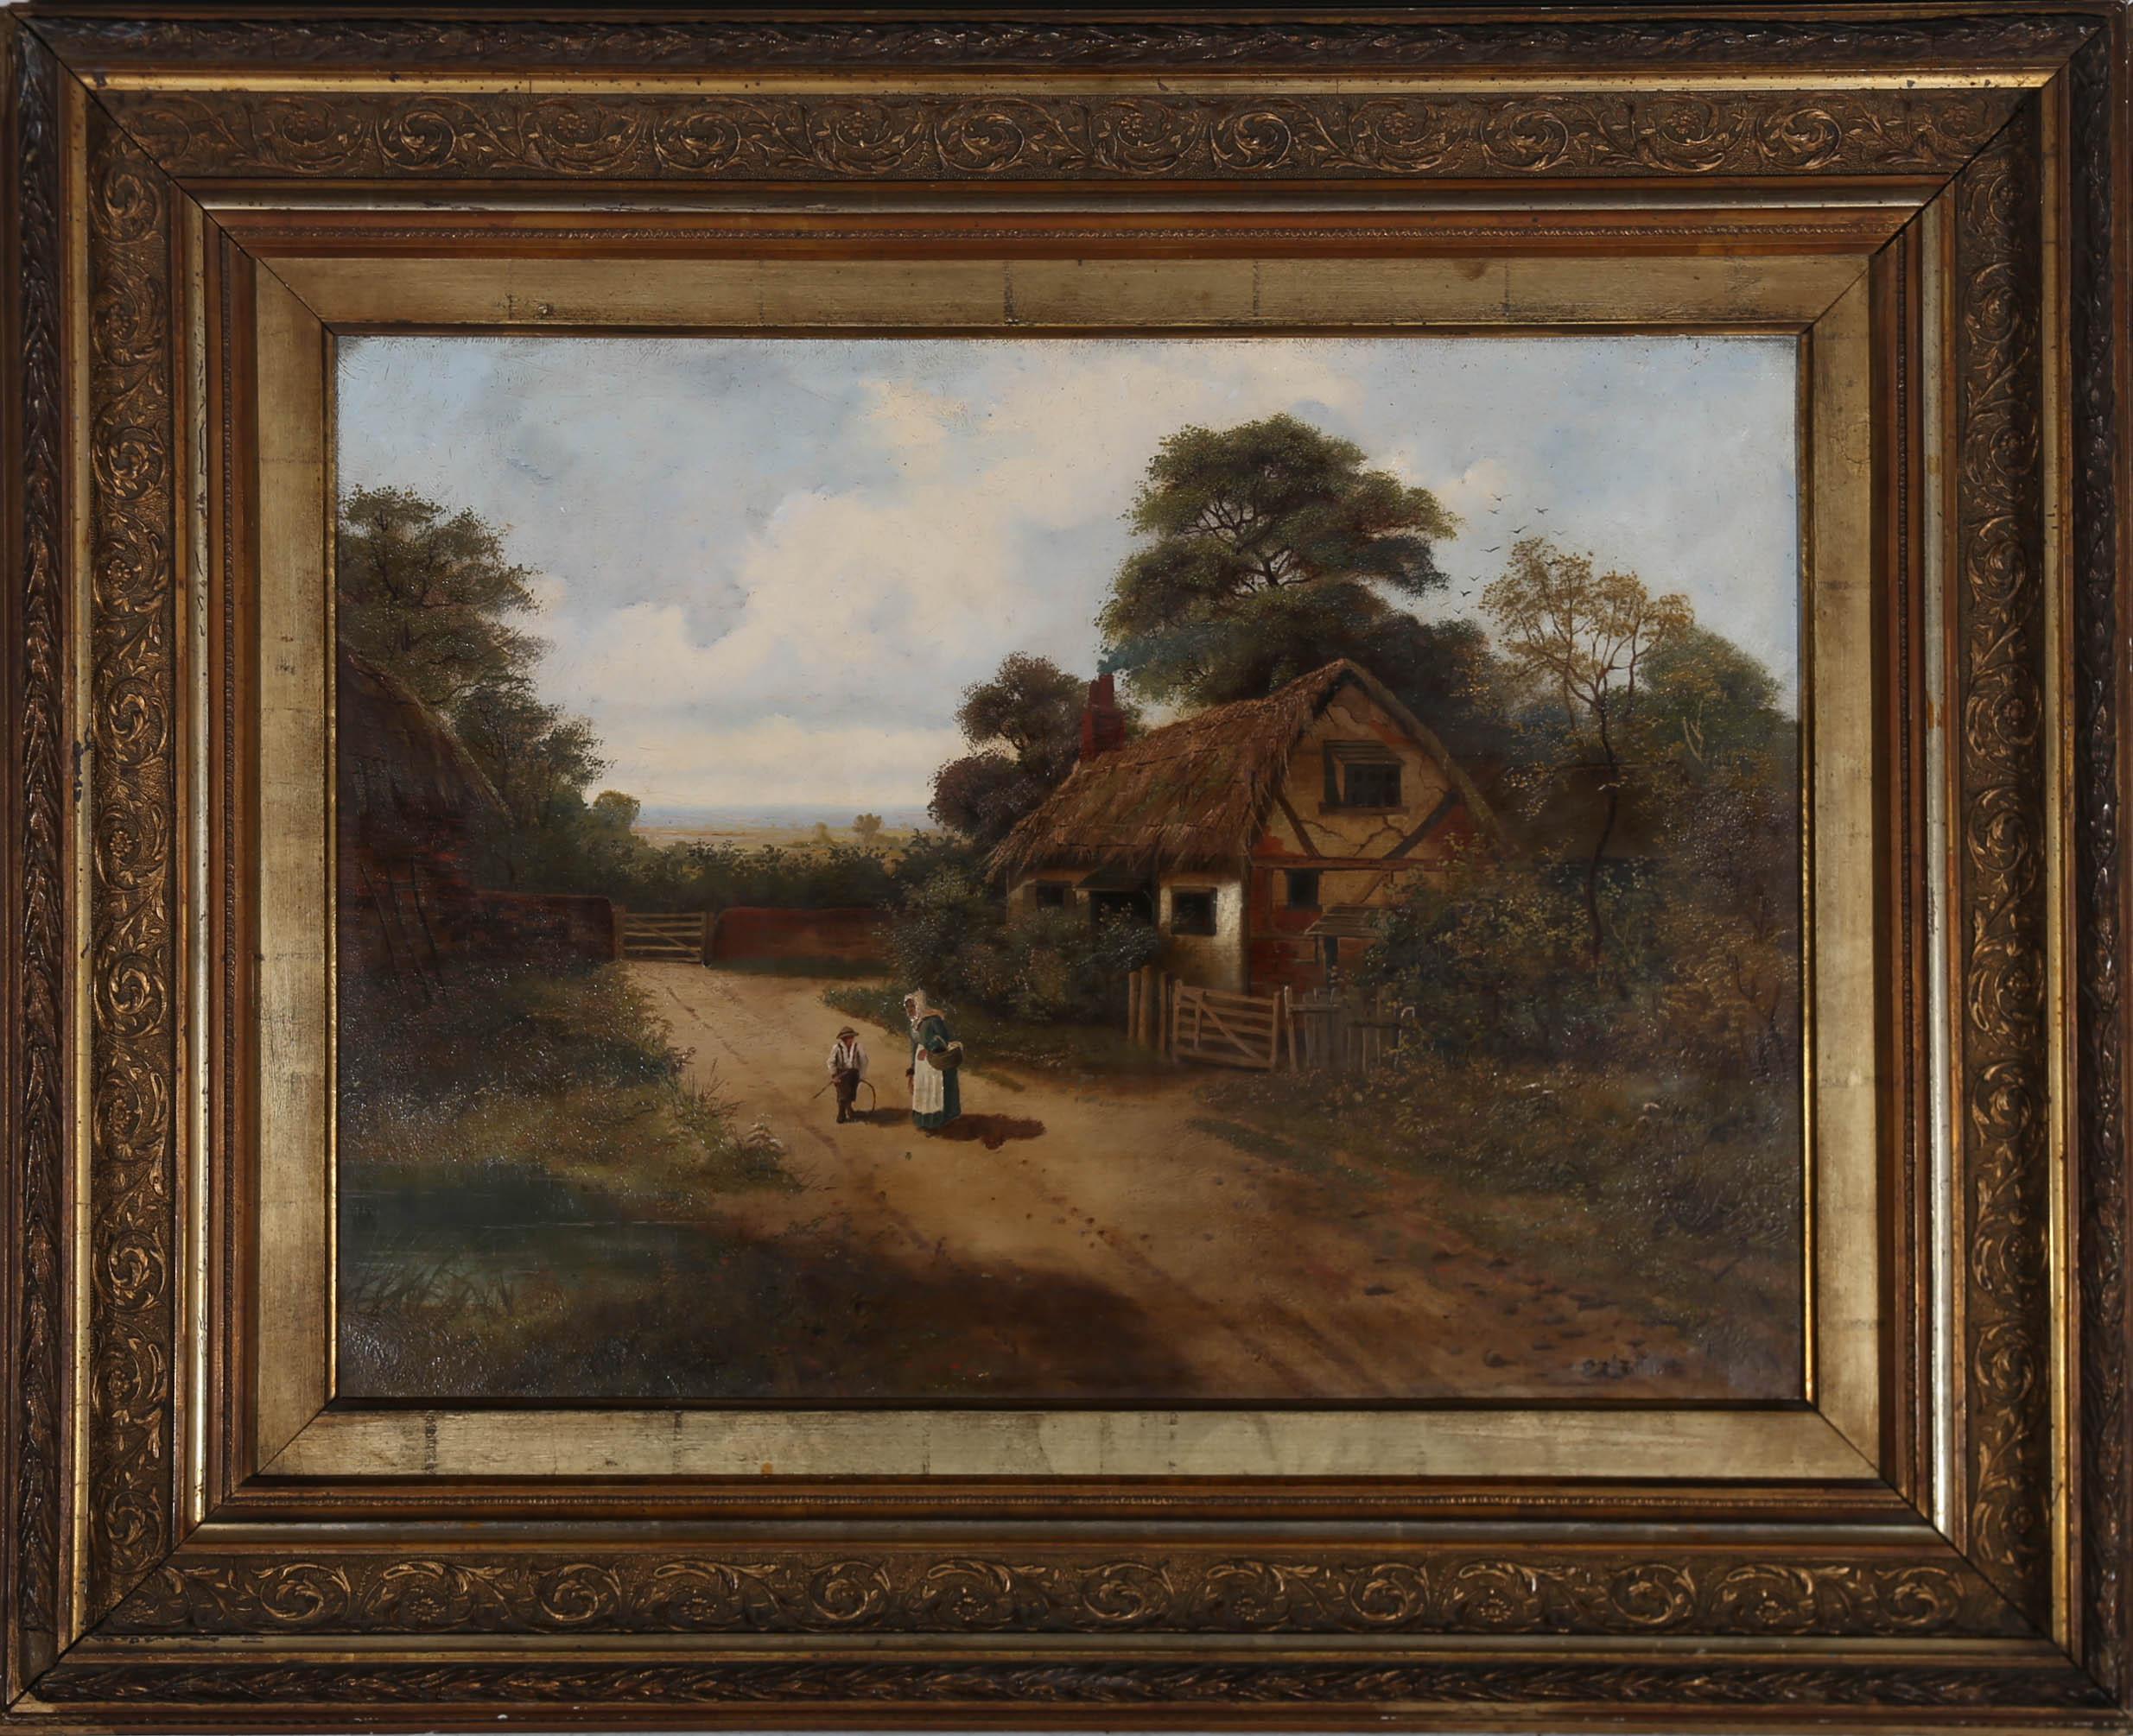 A delightful depiction of a mother and son on a dirt track before a thatched cottage. The child clutches a hoop and stick while his patient mother waits by his side. The scene is captured with a naïve charm which shines through in the small